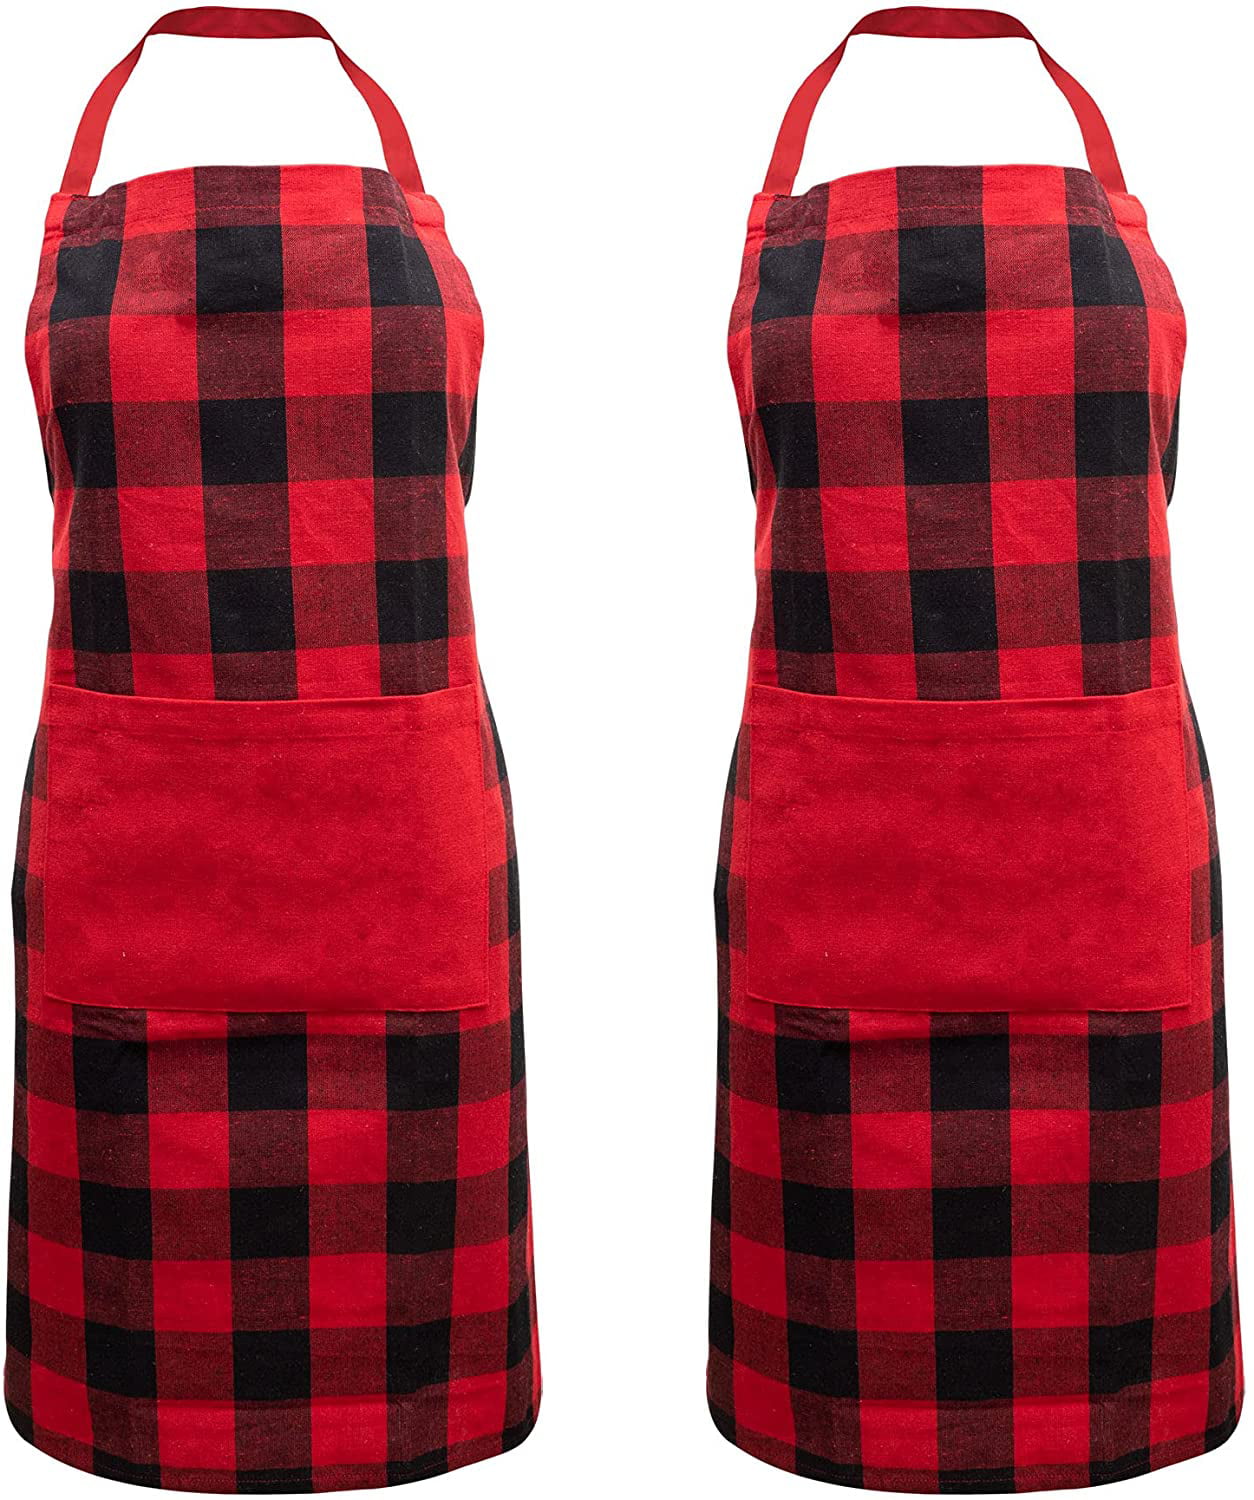 Hivory Kitchen Bib Aprons For Women & Men ~ Free-Size Cooking Apron ~ Great for Both Men & Women ~ Chef Favorite With 2 Pockets ~ Black Pinstripe, Pack of 2 